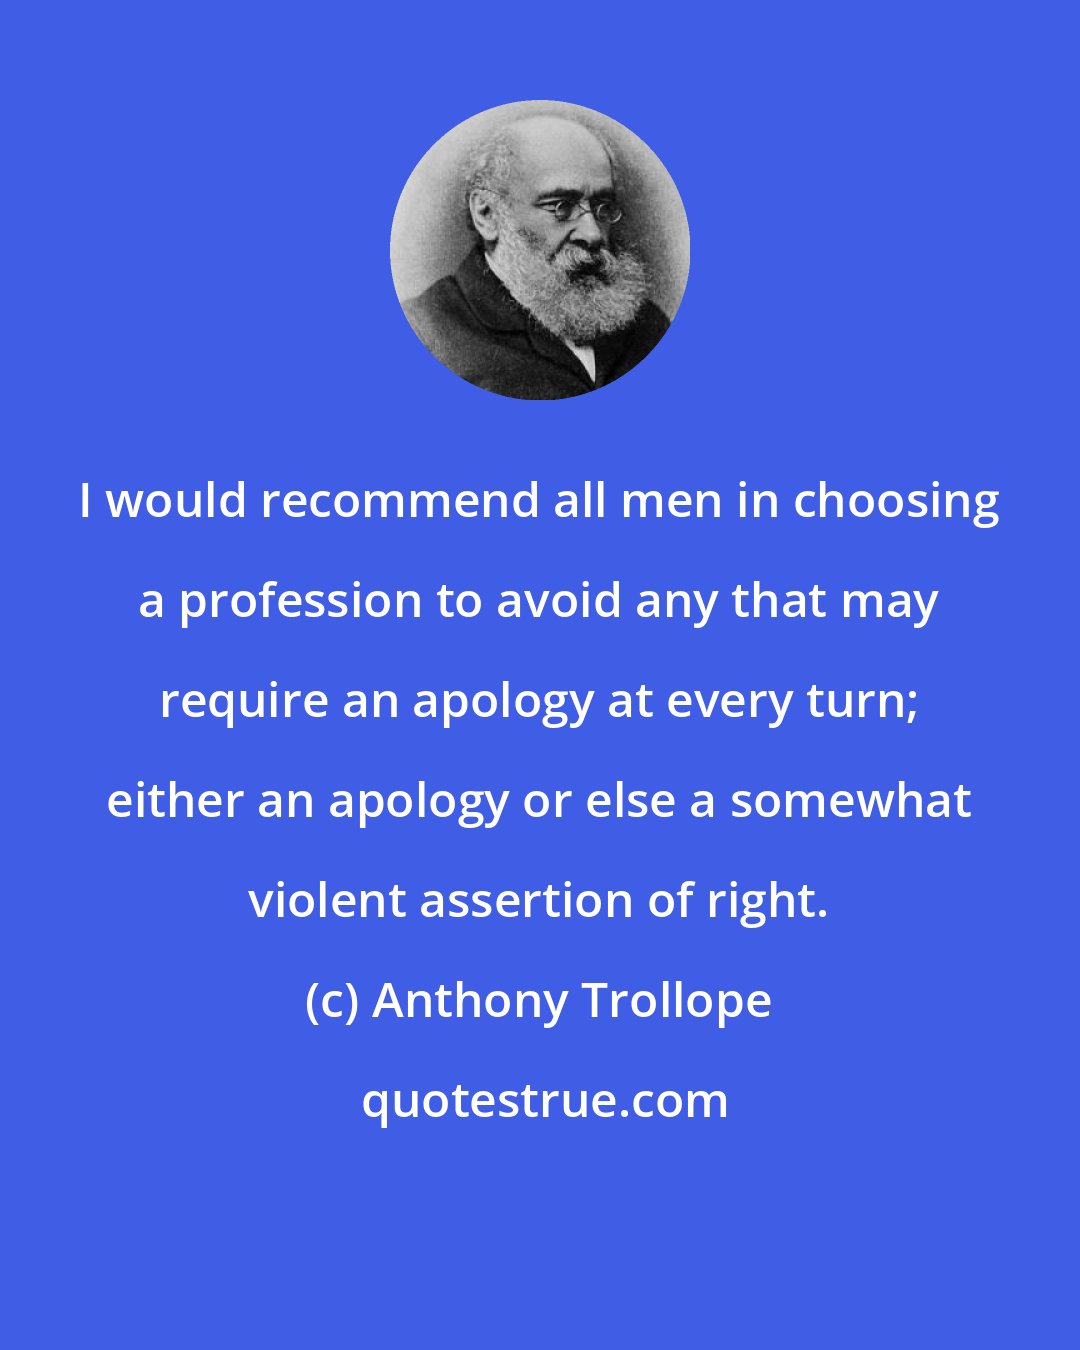 Anthony Trollope: I would recommend all men in choosing a profession to avoid any that may require an apology at every turn; either an apology or else a somewhat violent assertion of right.